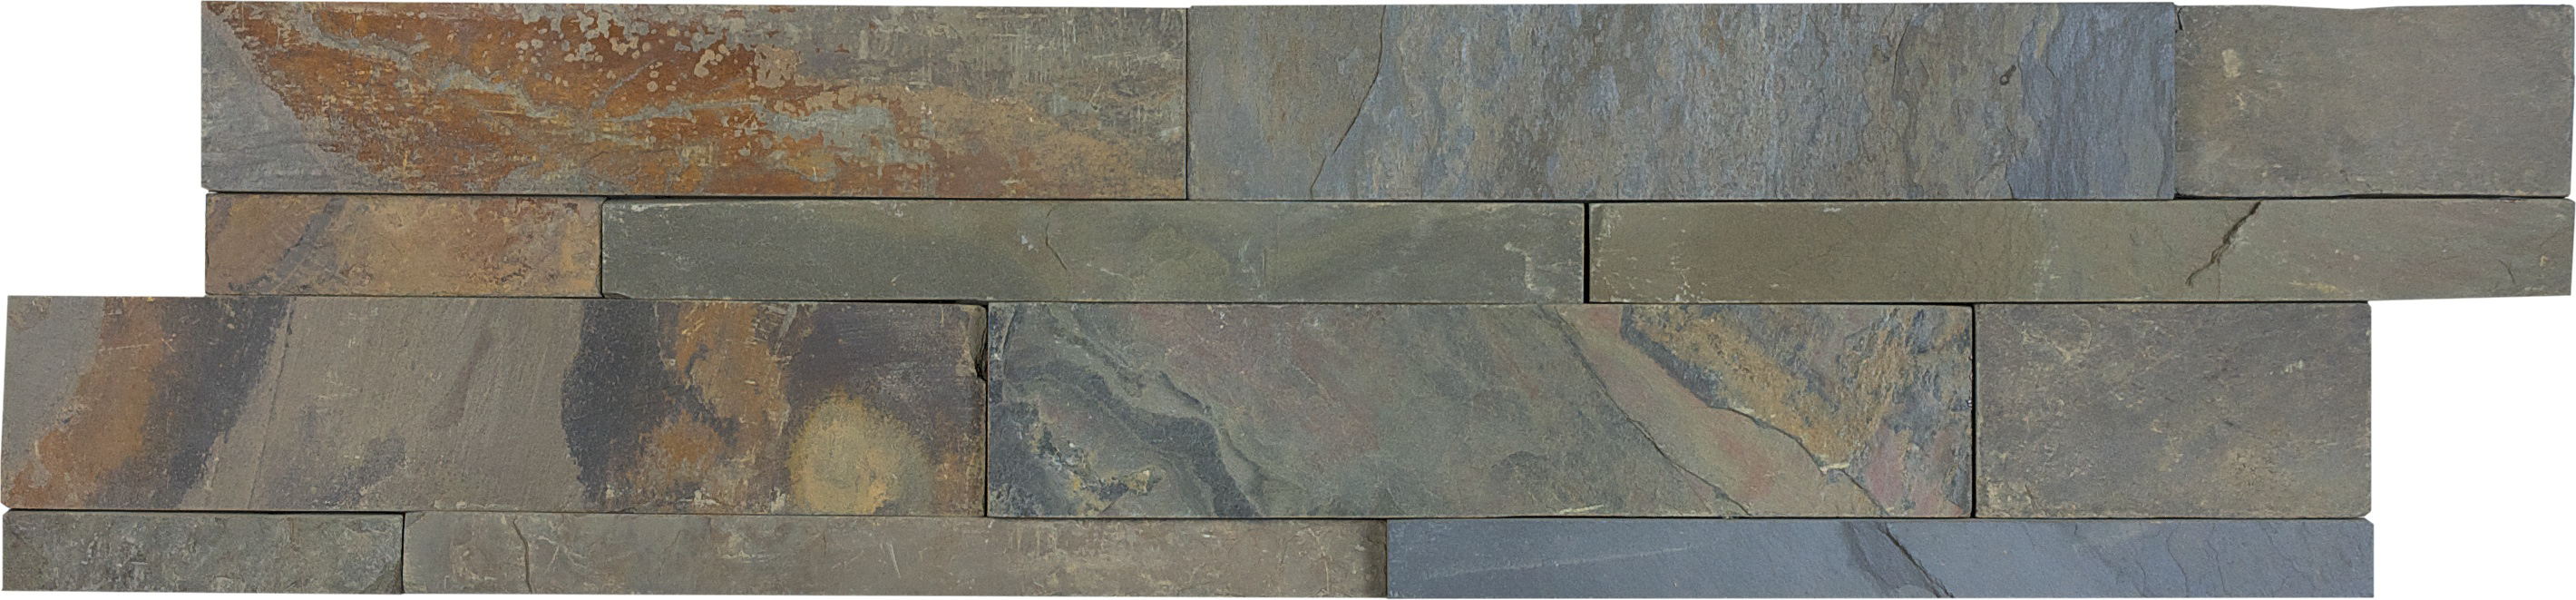 quartzite indian coast pattern natural stone field tile from ledger stone anatolia collection distributed by surface group international split face finish straight edge edge 6x24 rectangle shape